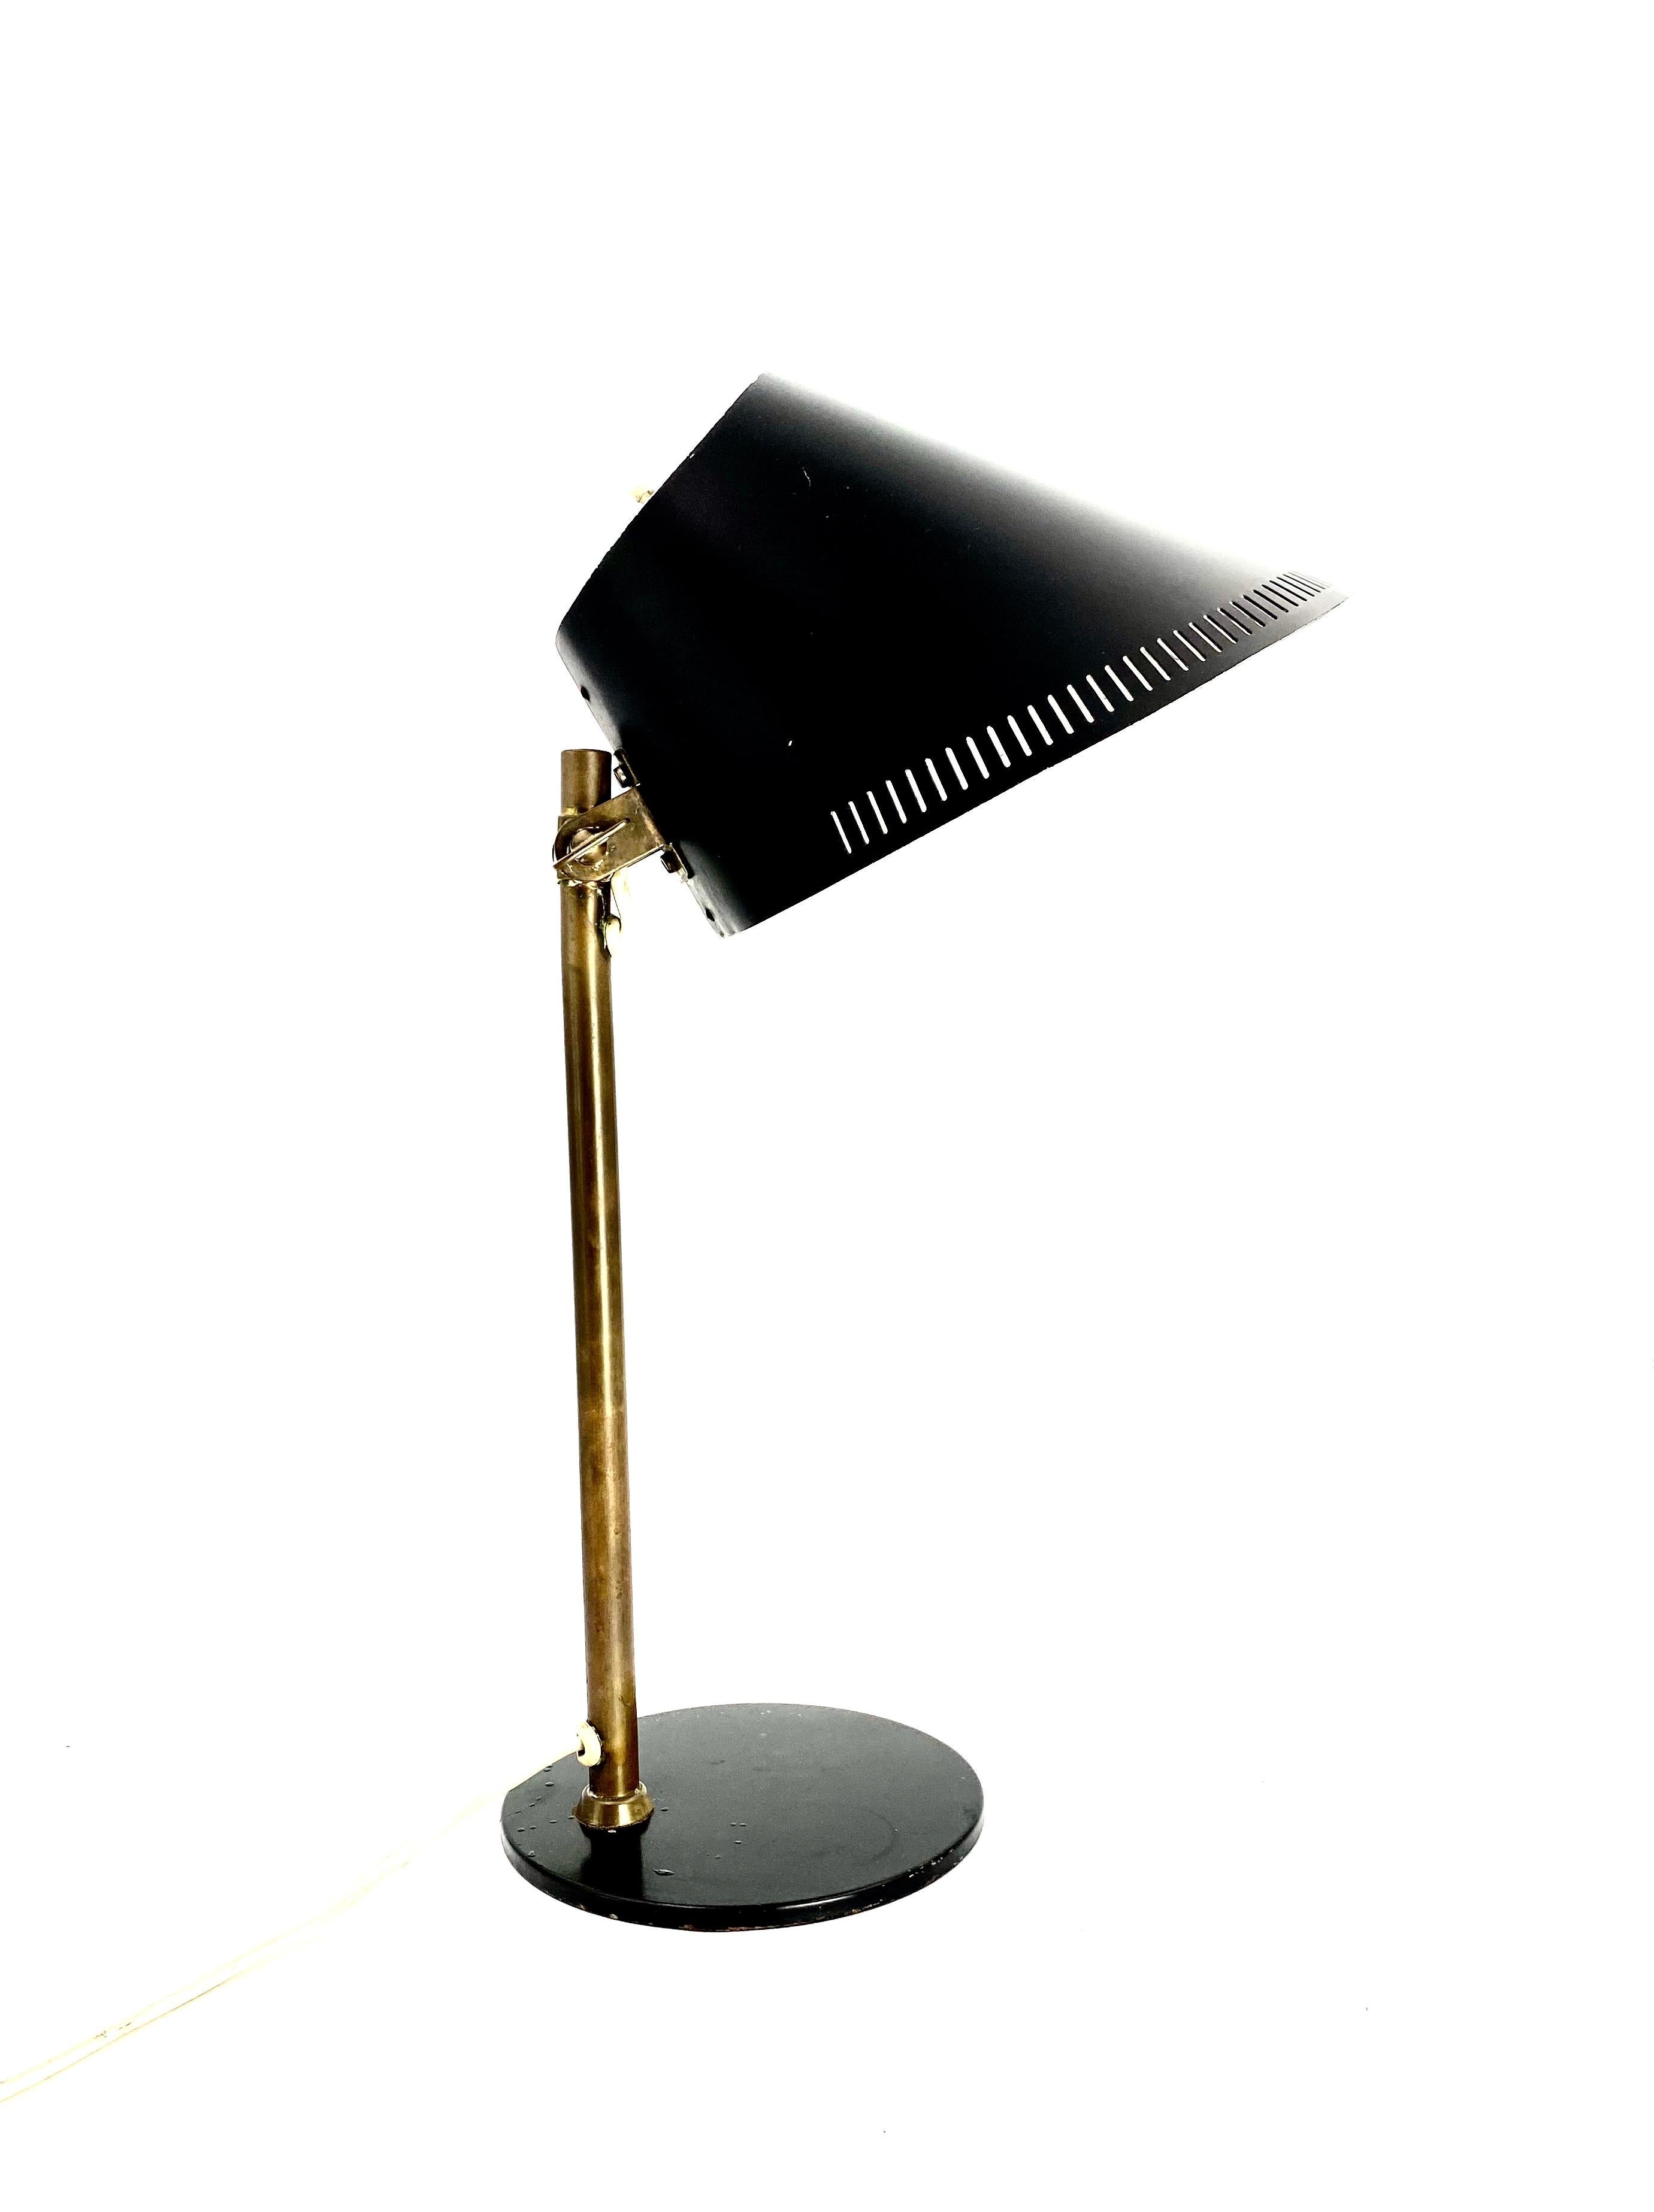 Paavo Tynell Rare Table Lamp Mod. 9227, by Taito E Idman, Finland, 1958 For Sale 8